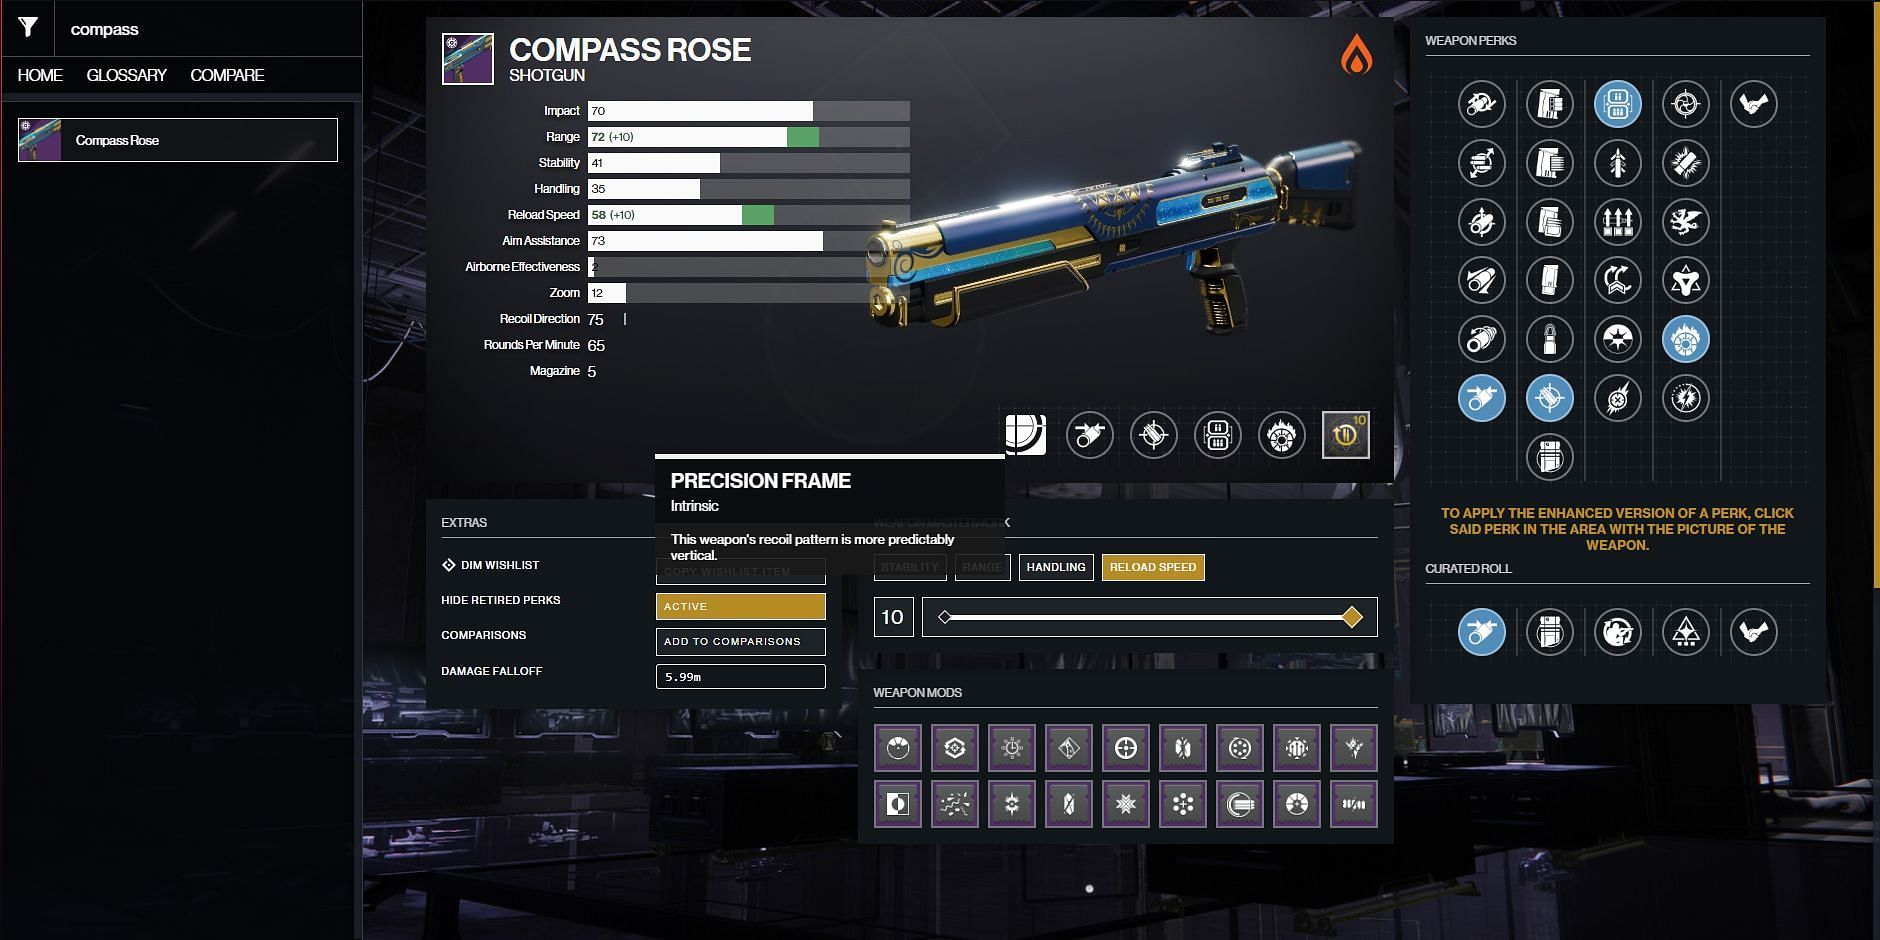 Compass Rose god roll guide in Destiny 2 PvP and PvE